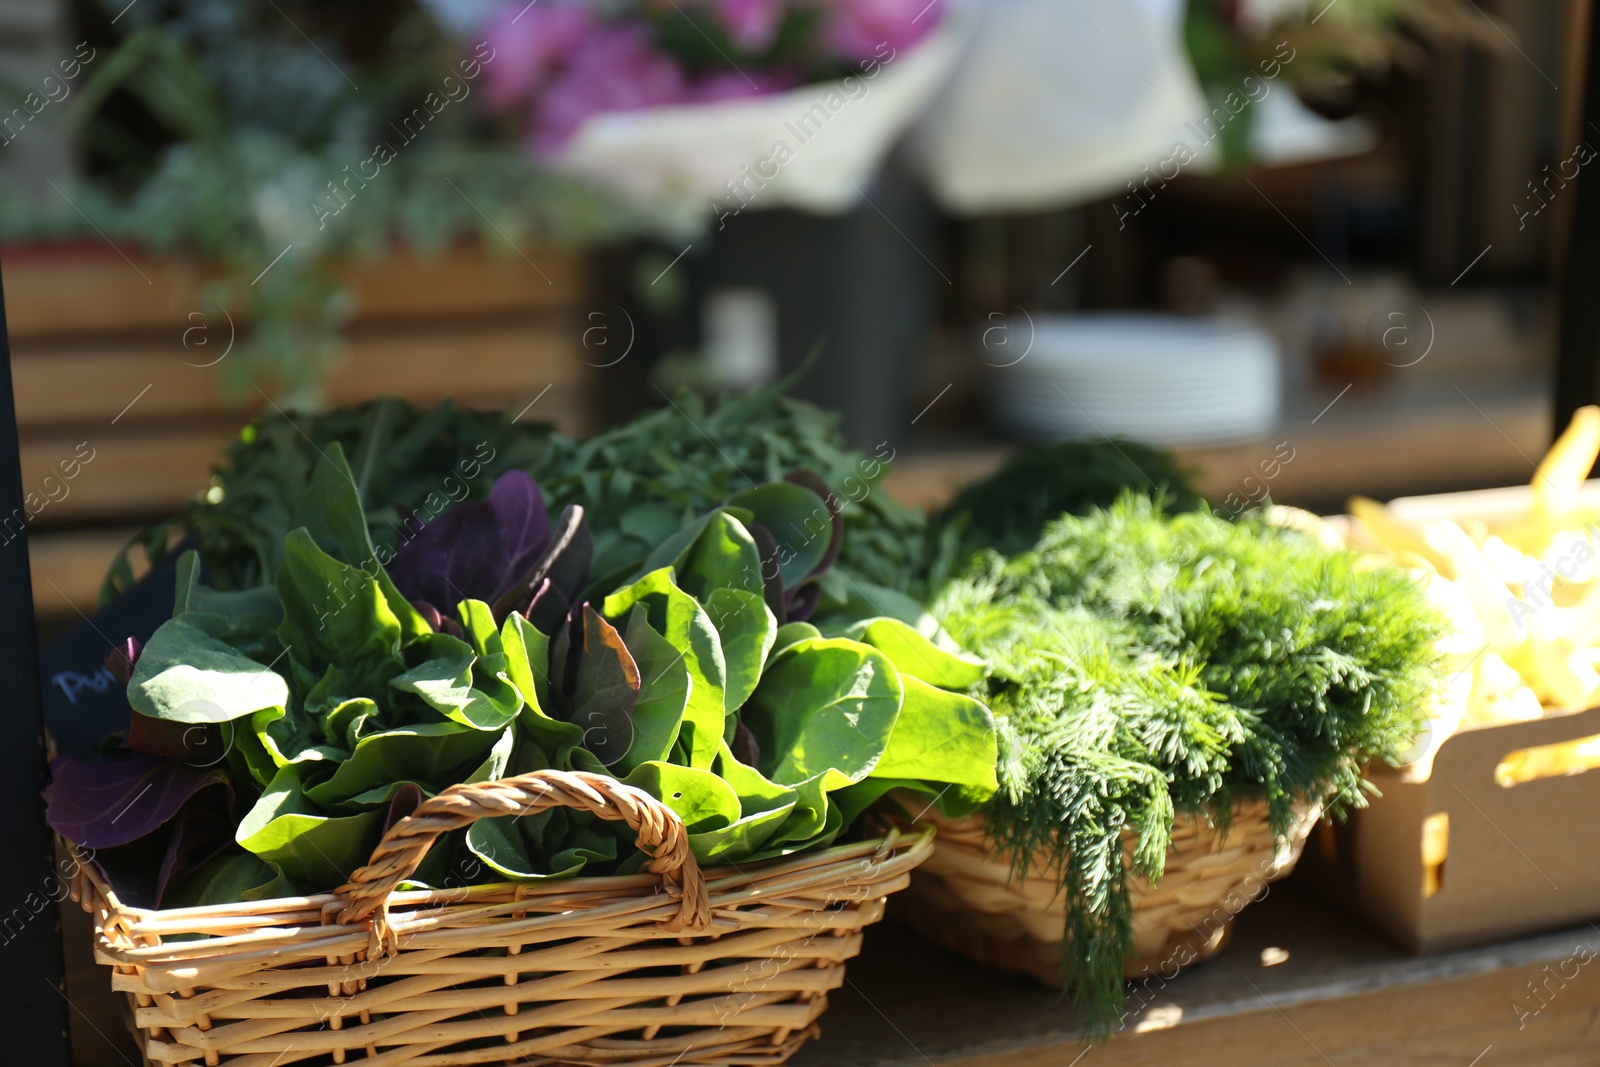 Photo of Different herbs in wicker baskets on table outdoors, closeup